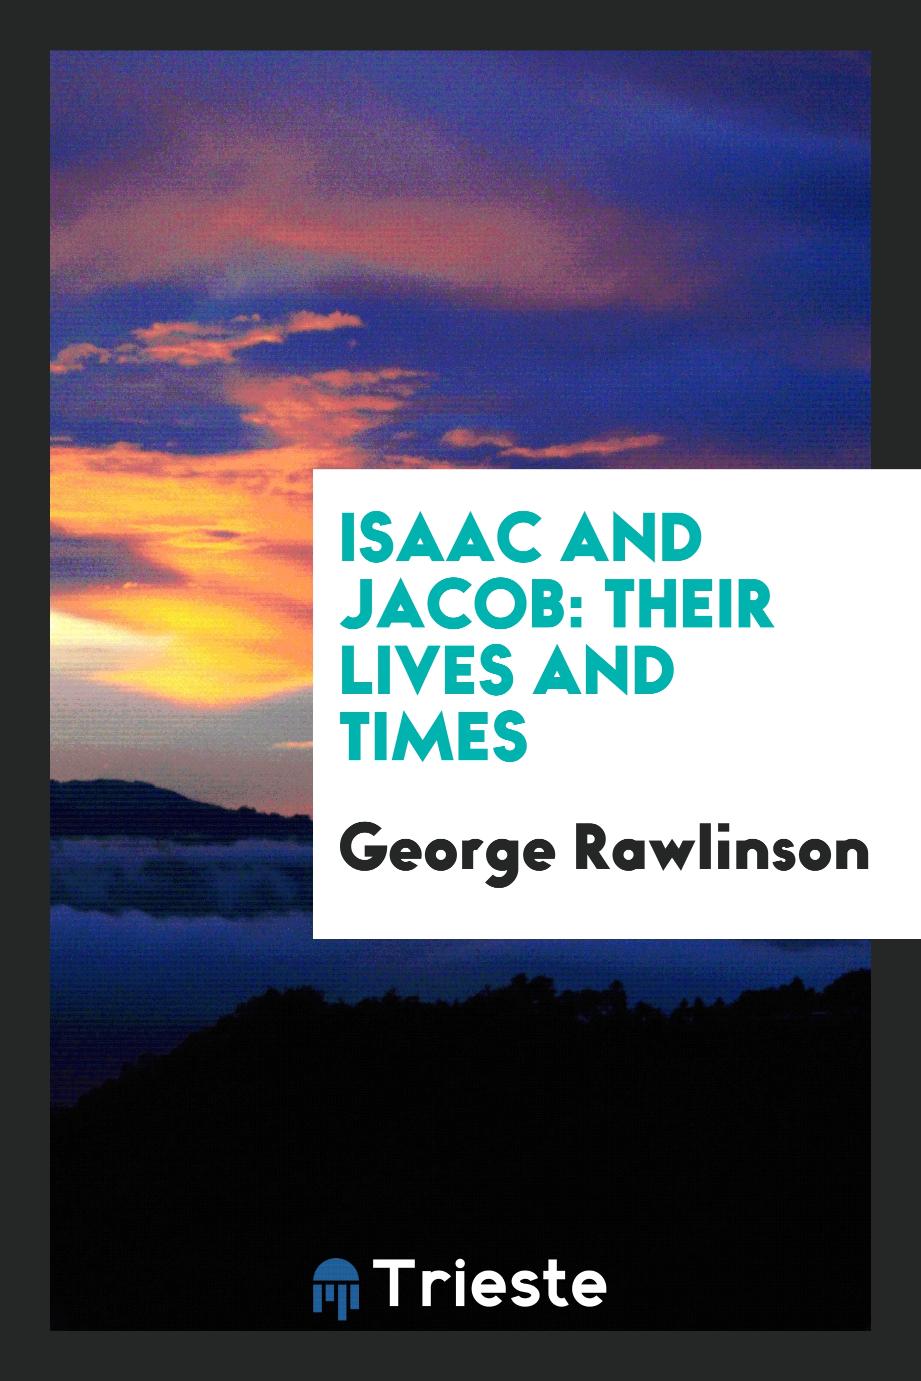 Isaac and Jacob: their lives and times